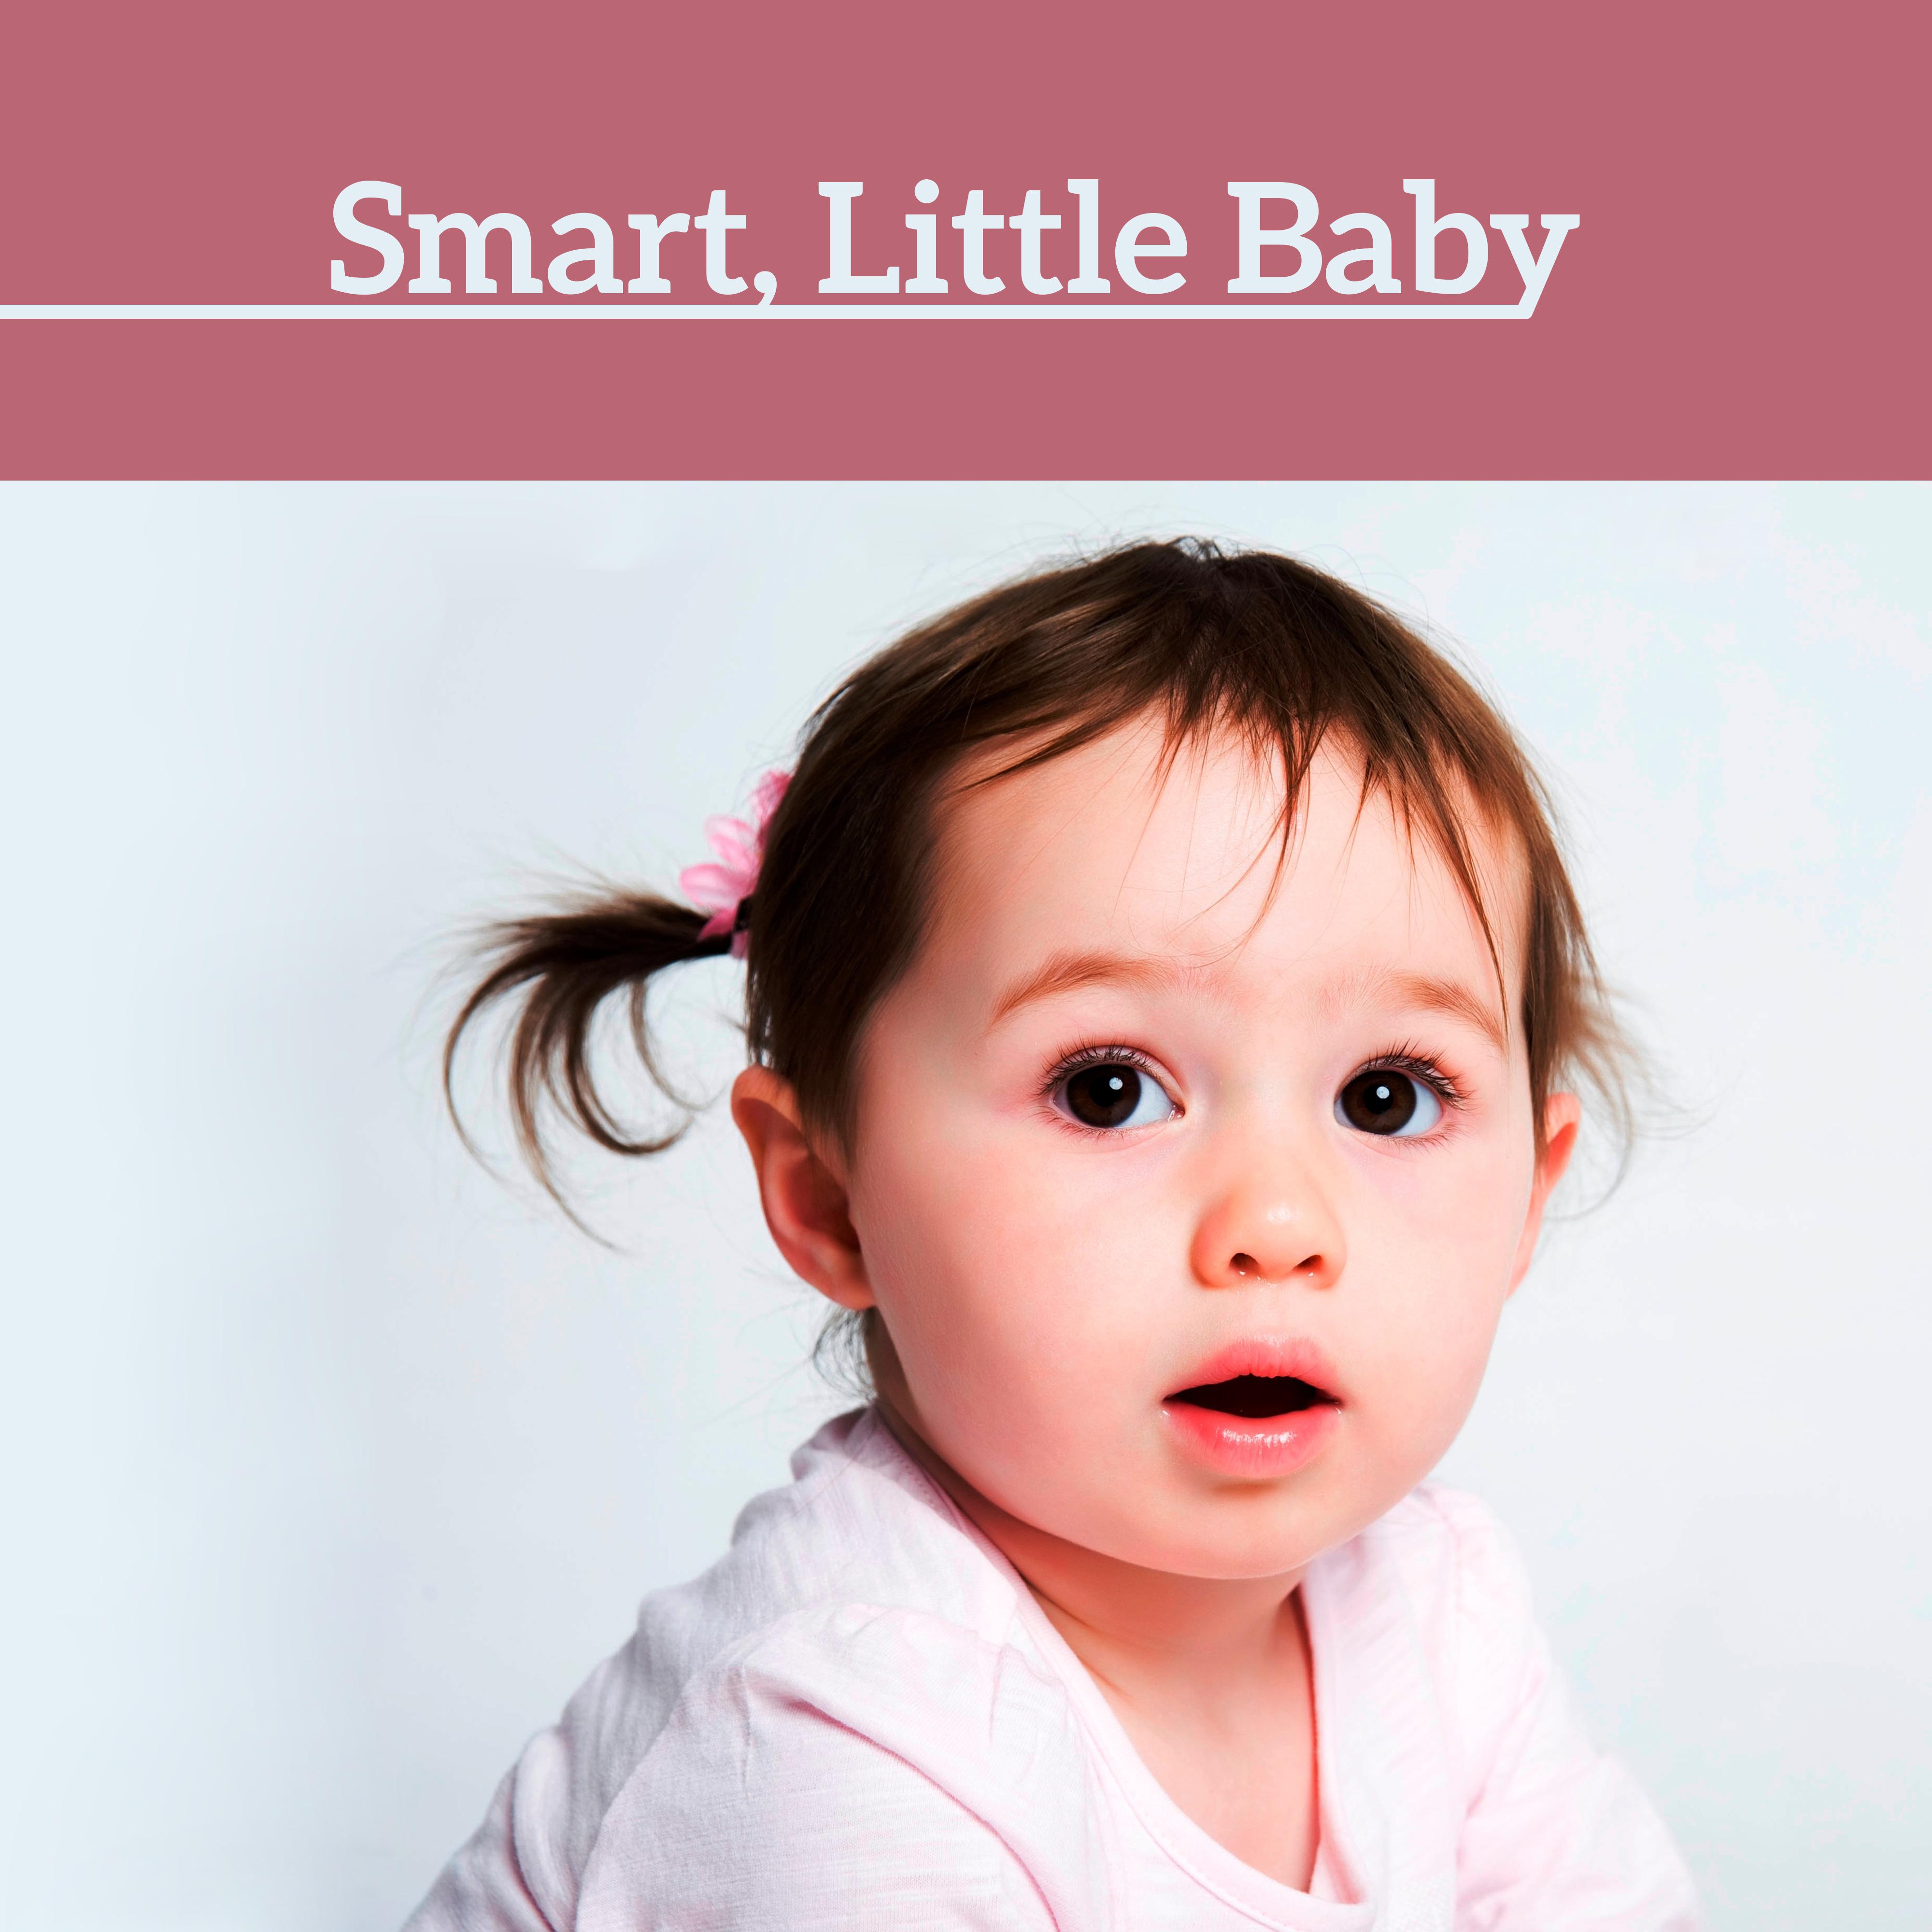 Smart, Little Baby – Baby Music, Development of Child, Instrumental Songs for Listening, Better IQ Your Baby, Mozart for Kids, Piano Music